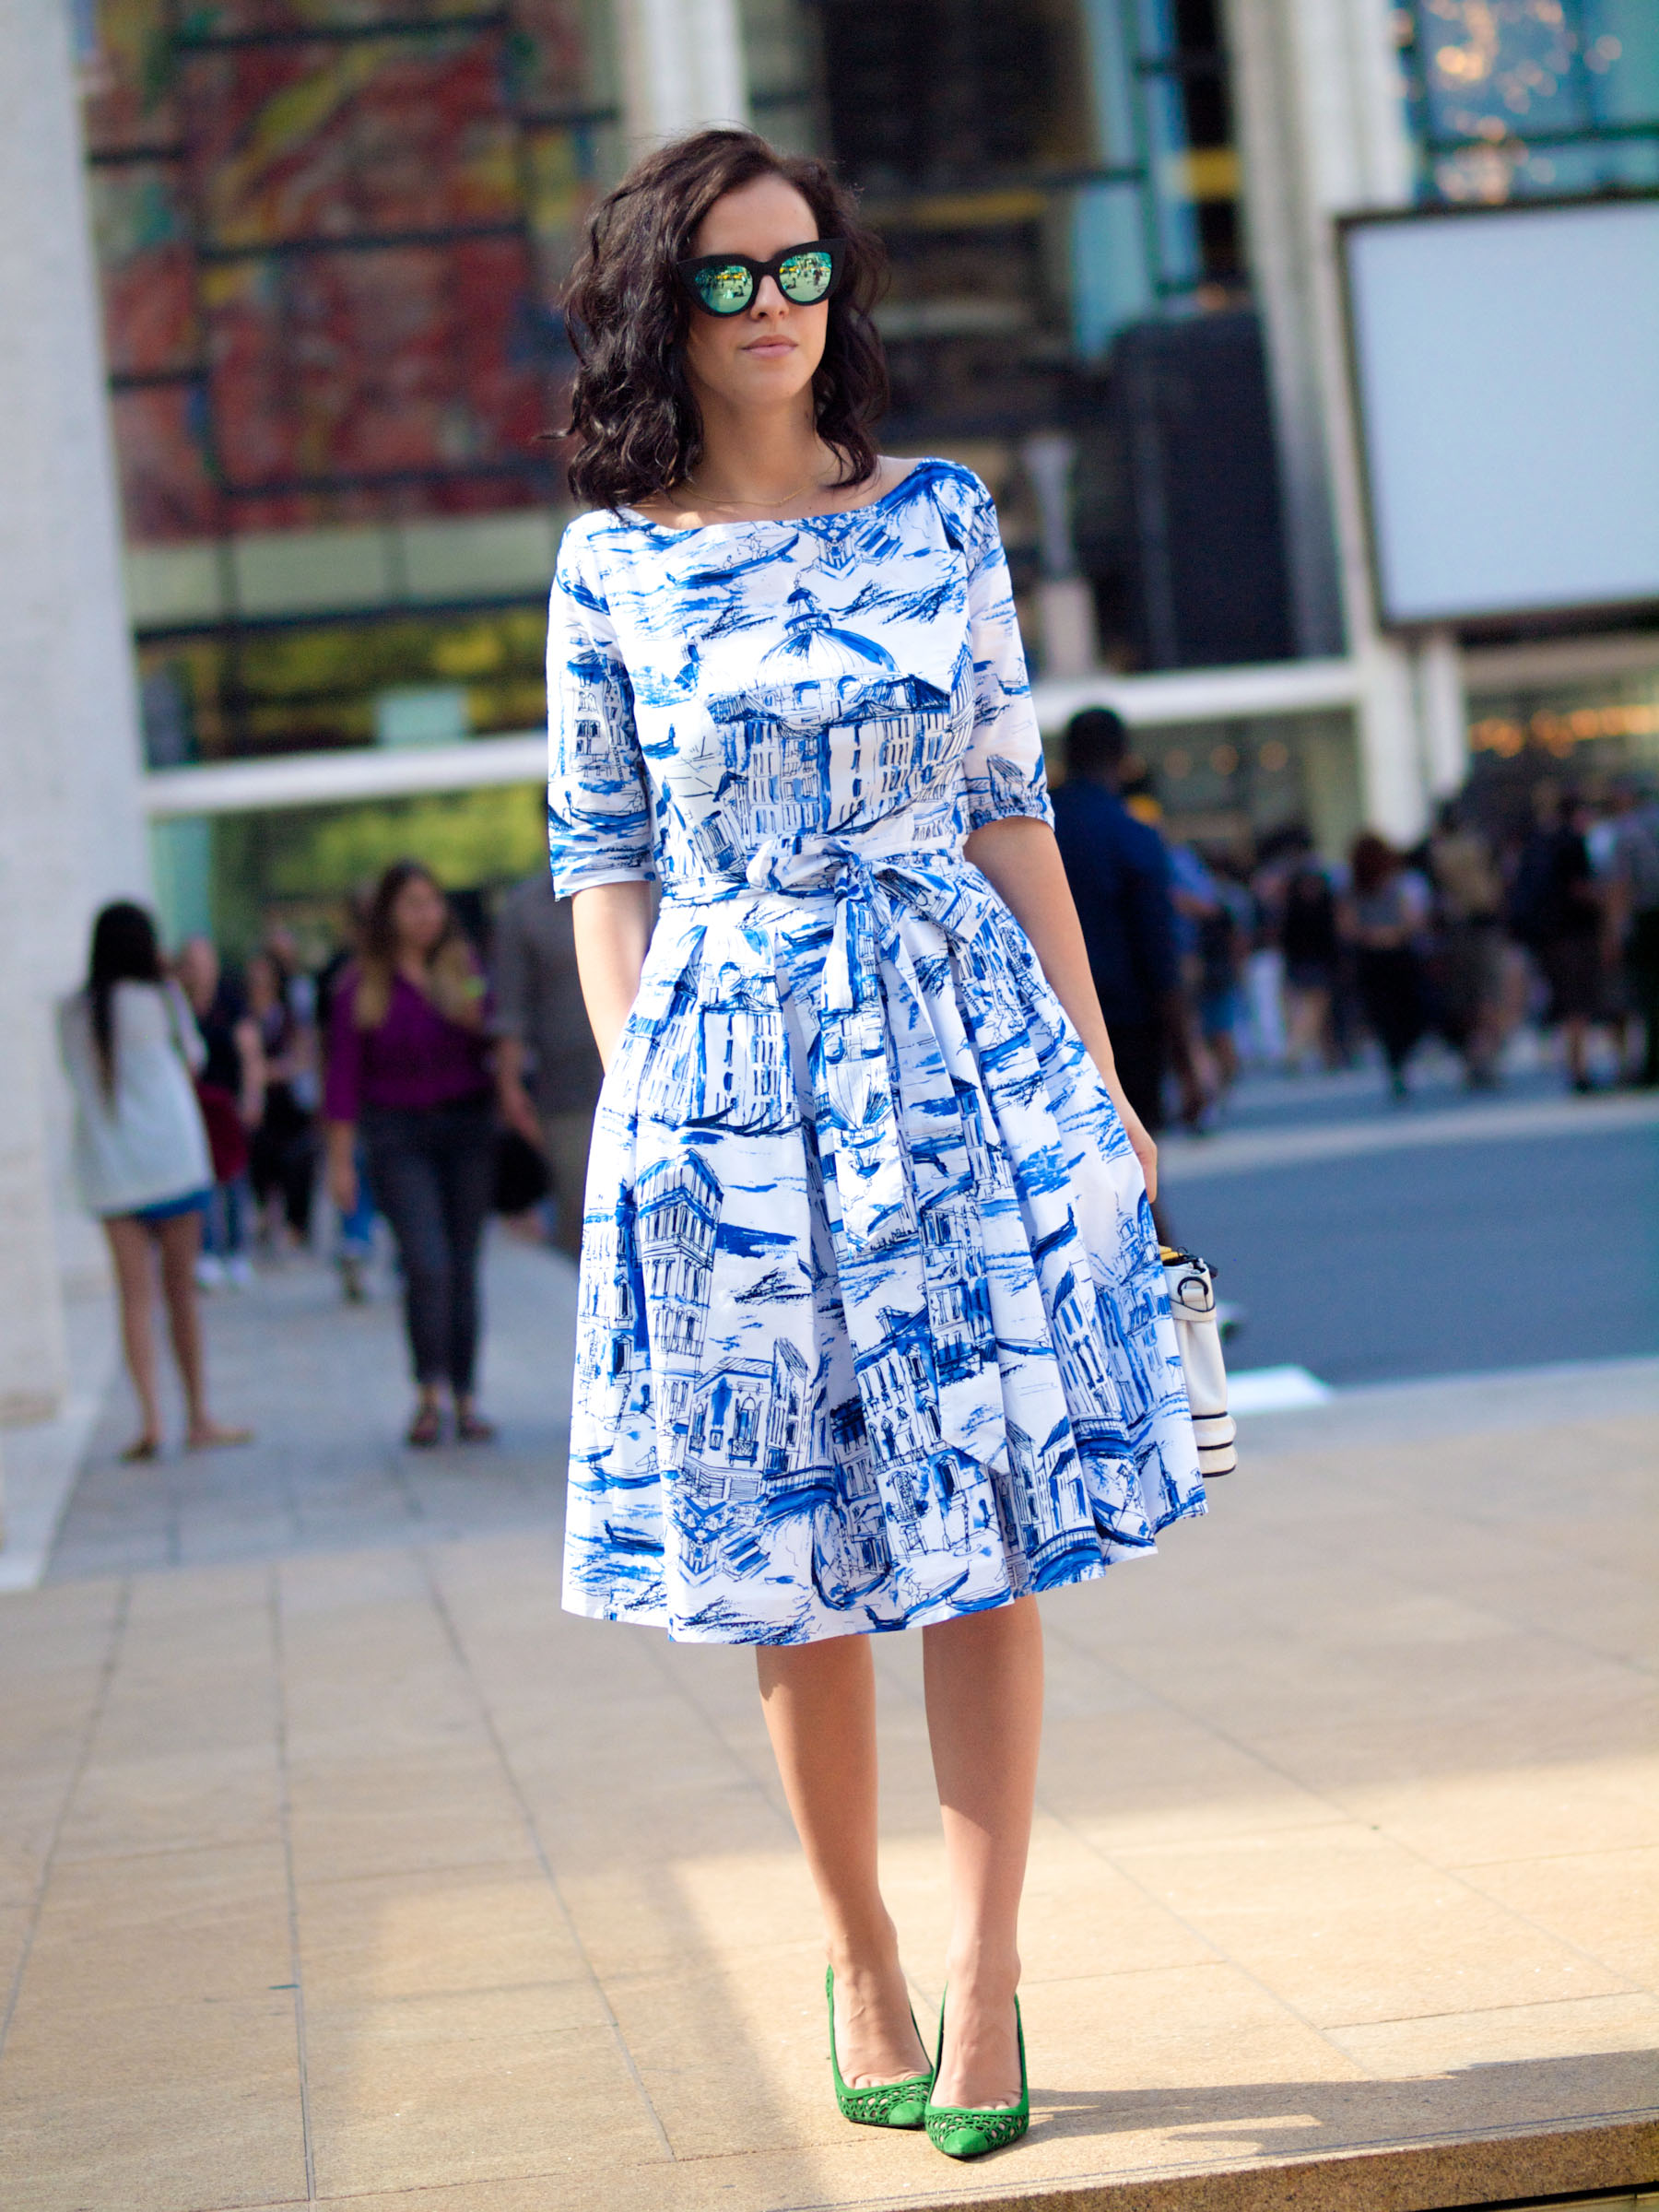 asos sunglasses, bittersweet colours, cooee jewelry, eye cat sunglasses, facine bag, green shoes, ink drawing print dress, lincoln Center nyfw, mirrored sunglasses, New York, nyfw september 2014, nyfw street style, pierre hardy shoes, printed dress, 